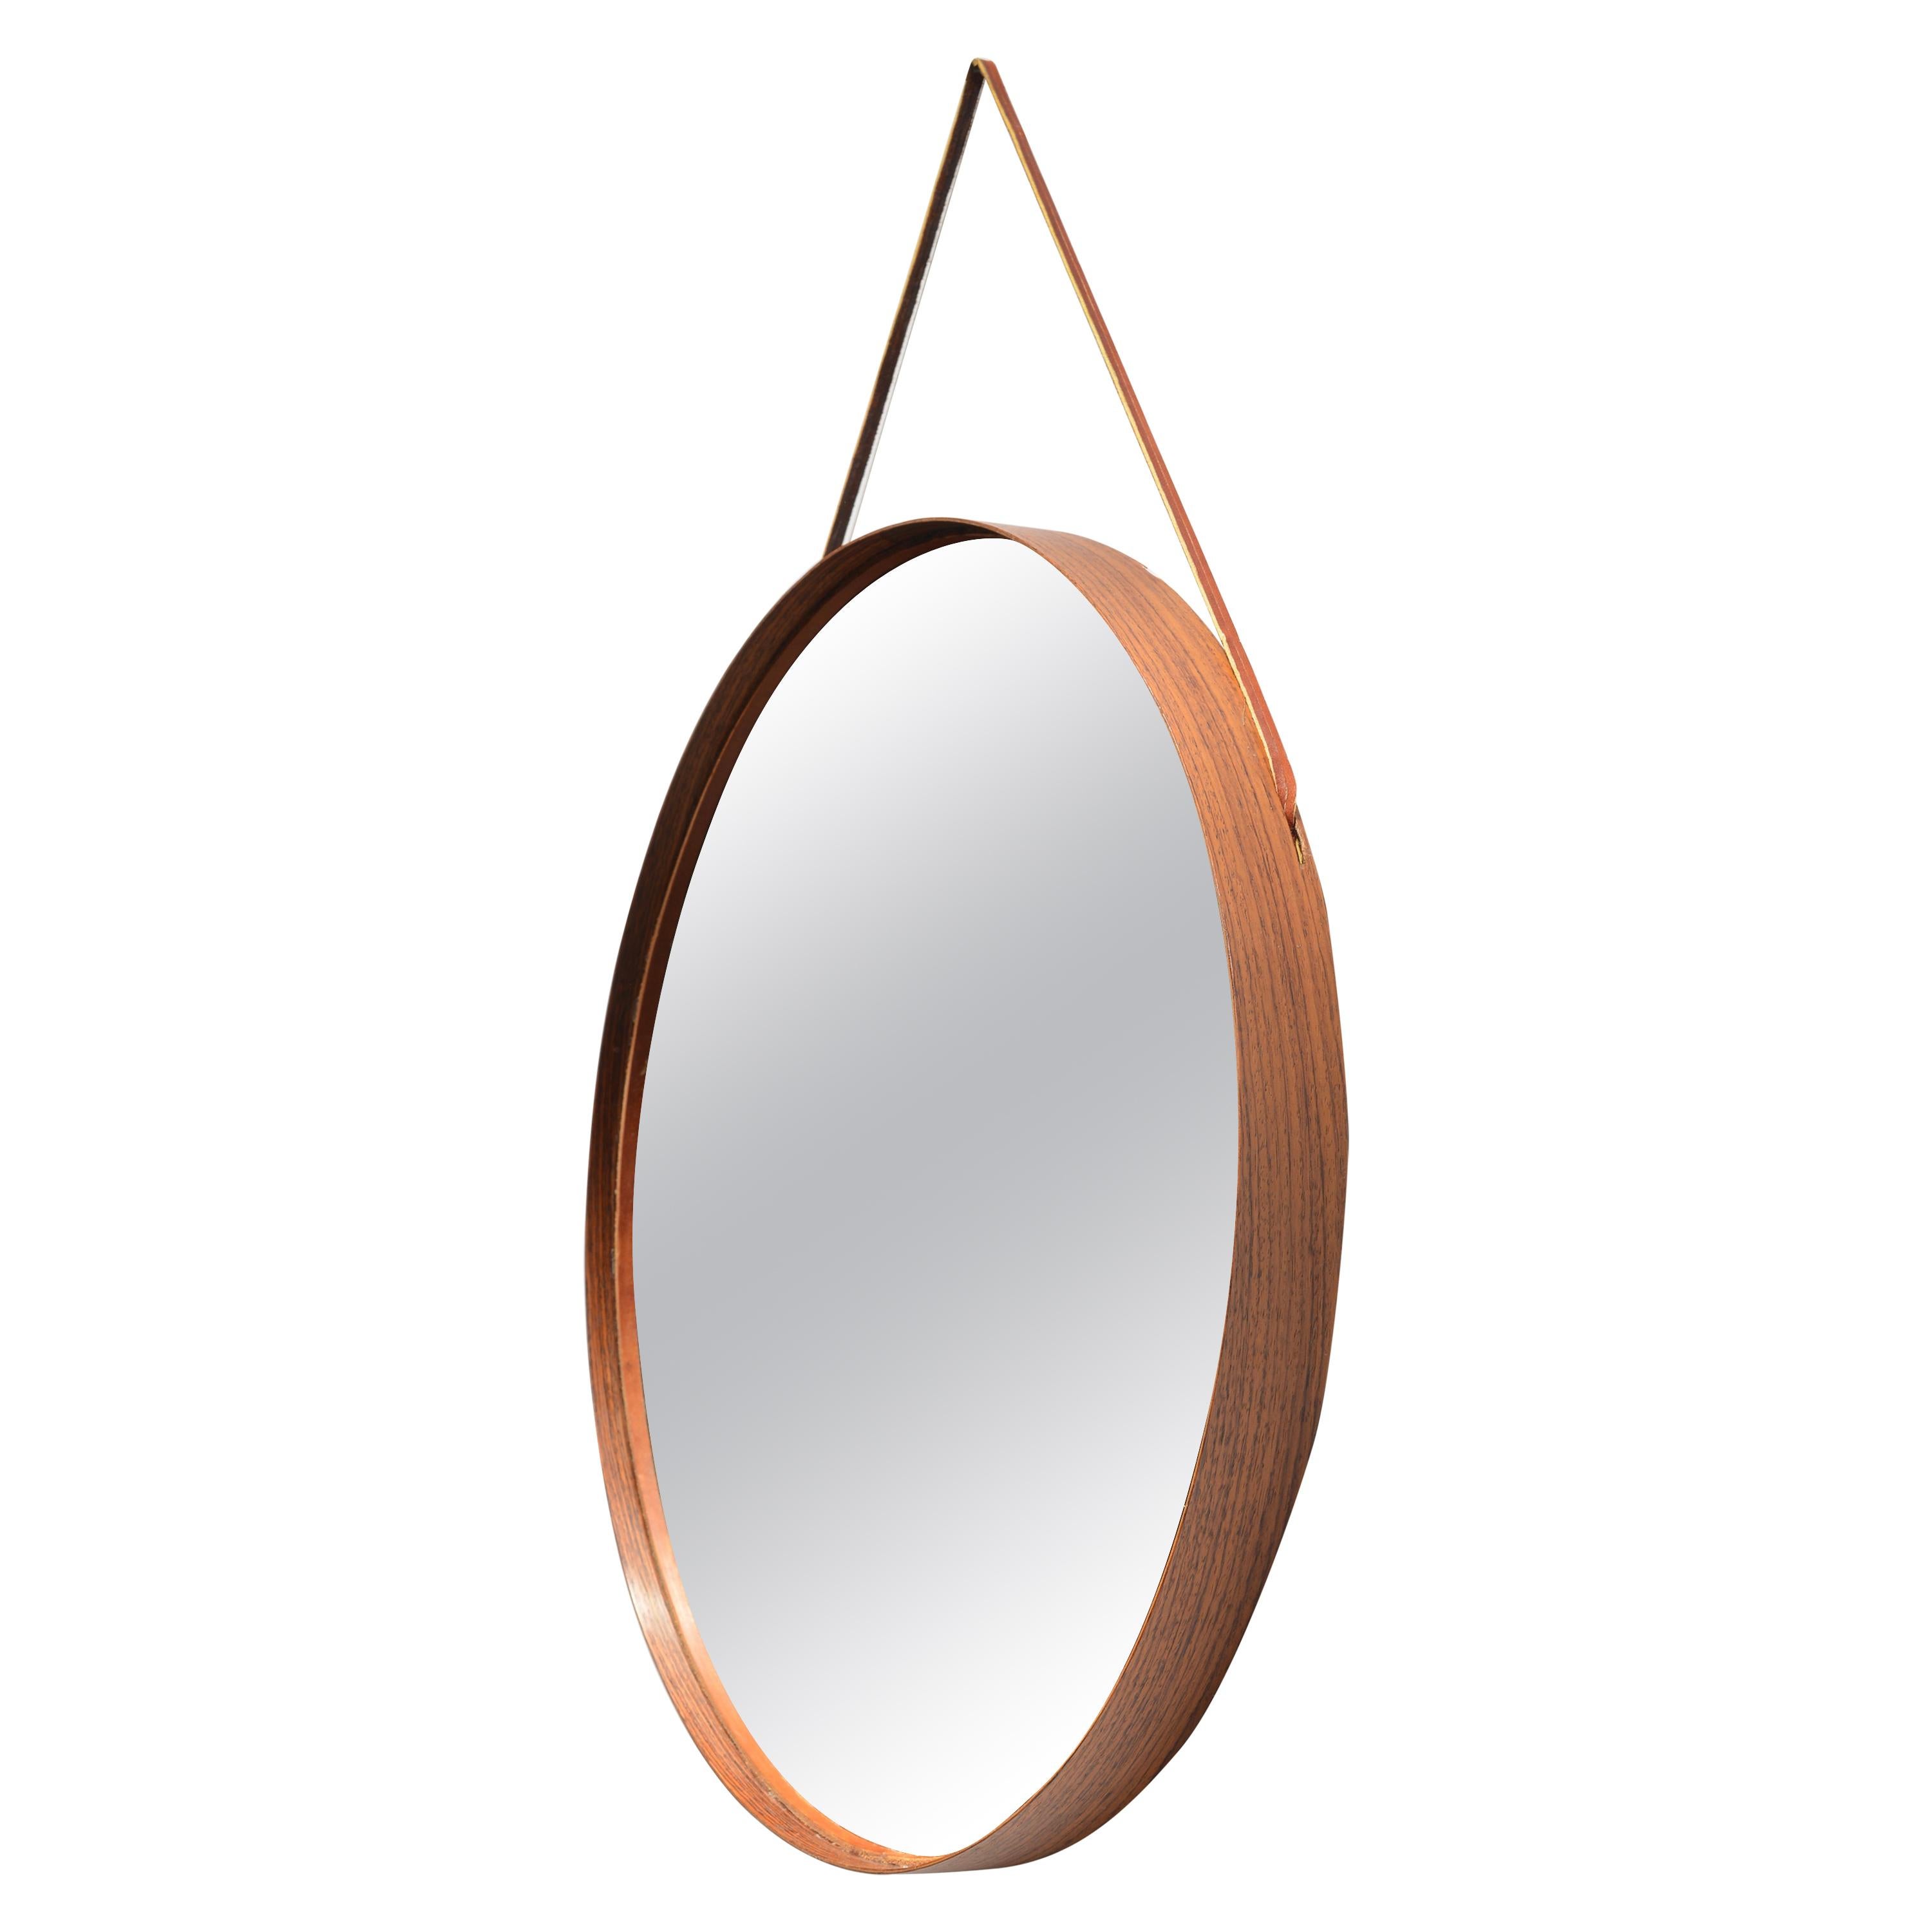 Mirror in Rosewood and Leather by Uno & Osten Kristiansson for Glas Mäster 